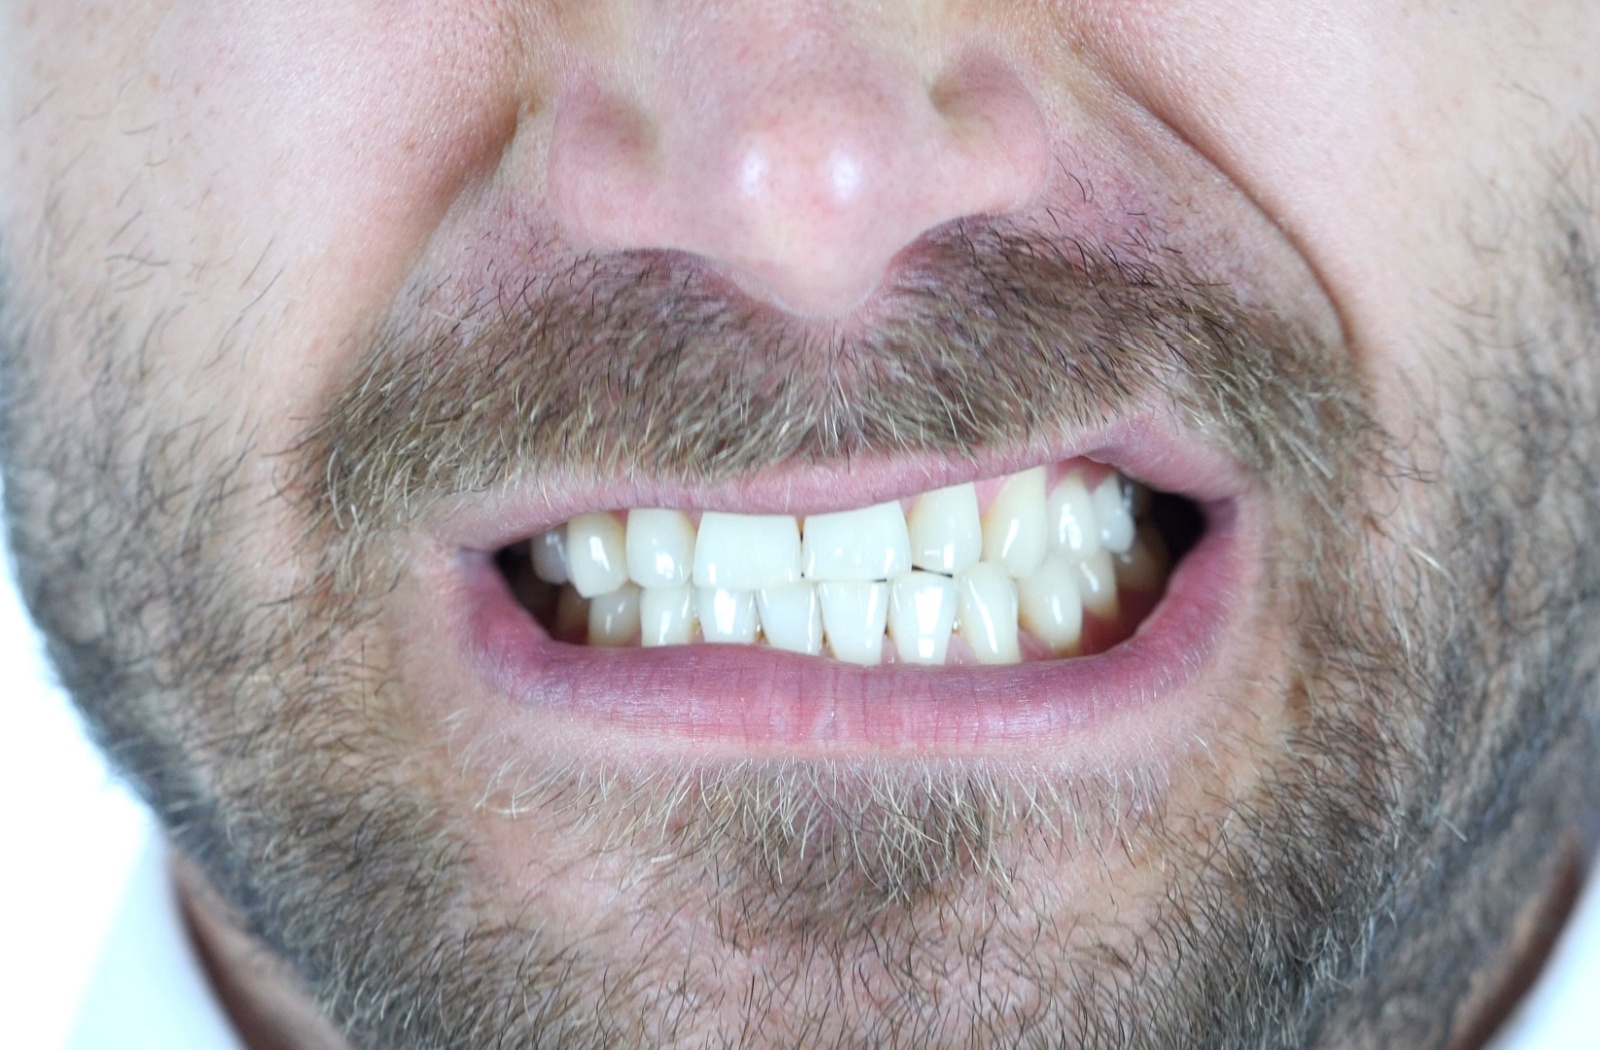 A close-up image of a bearded man tightly grinding his teeth.